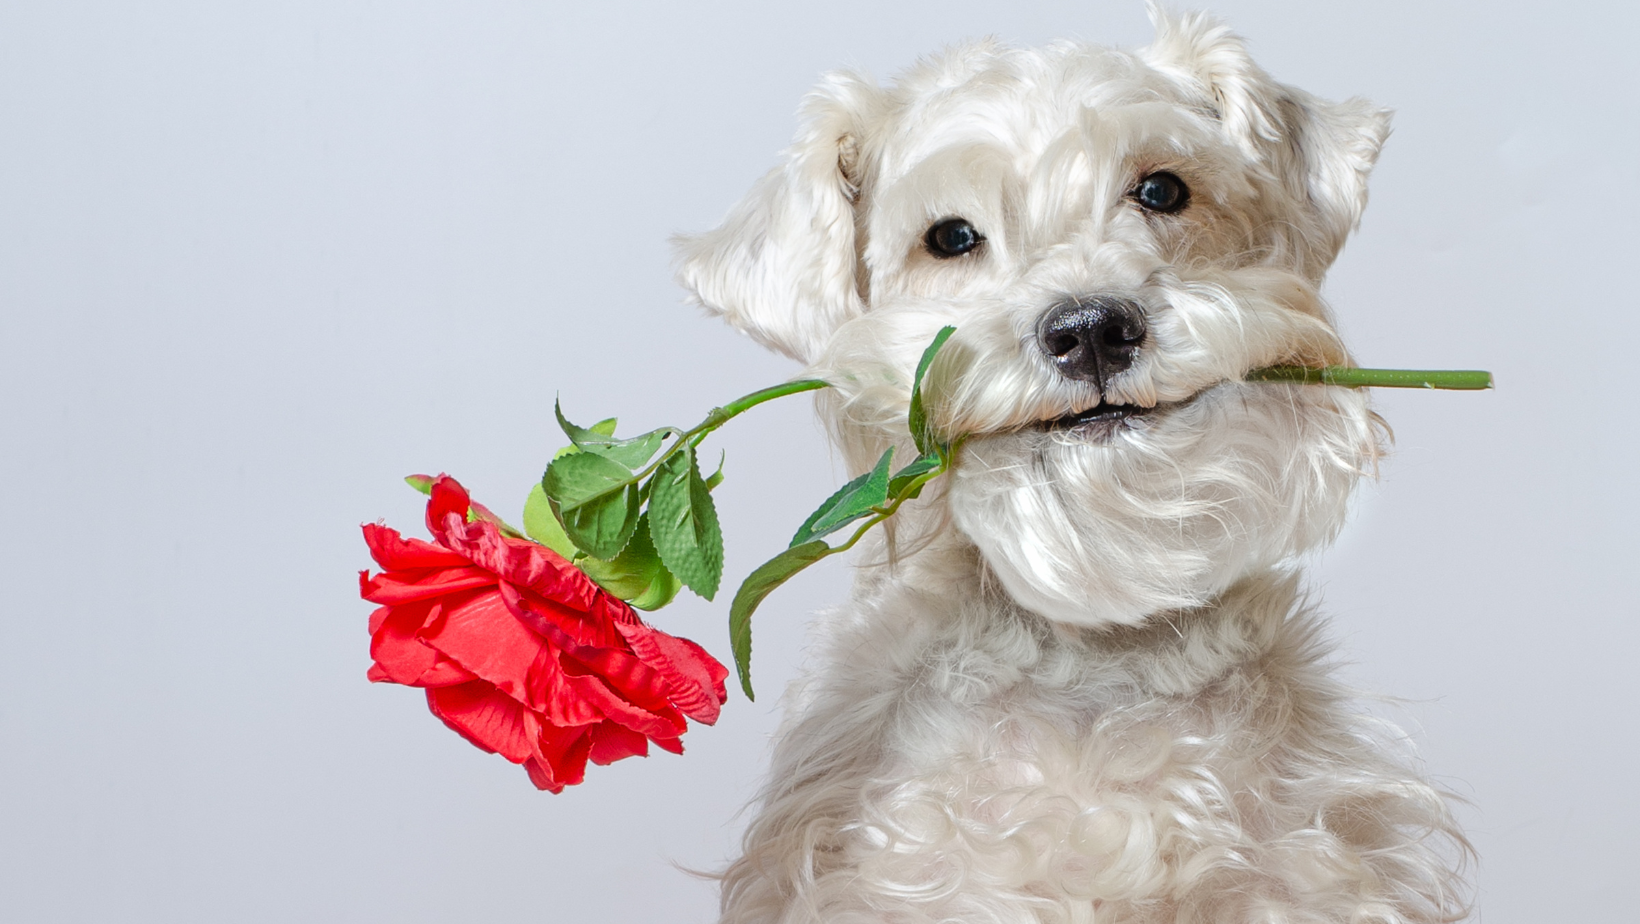 Broward County Animal Care Holds 'Stinky Ex' Fundraiser for Valentine's Day 3